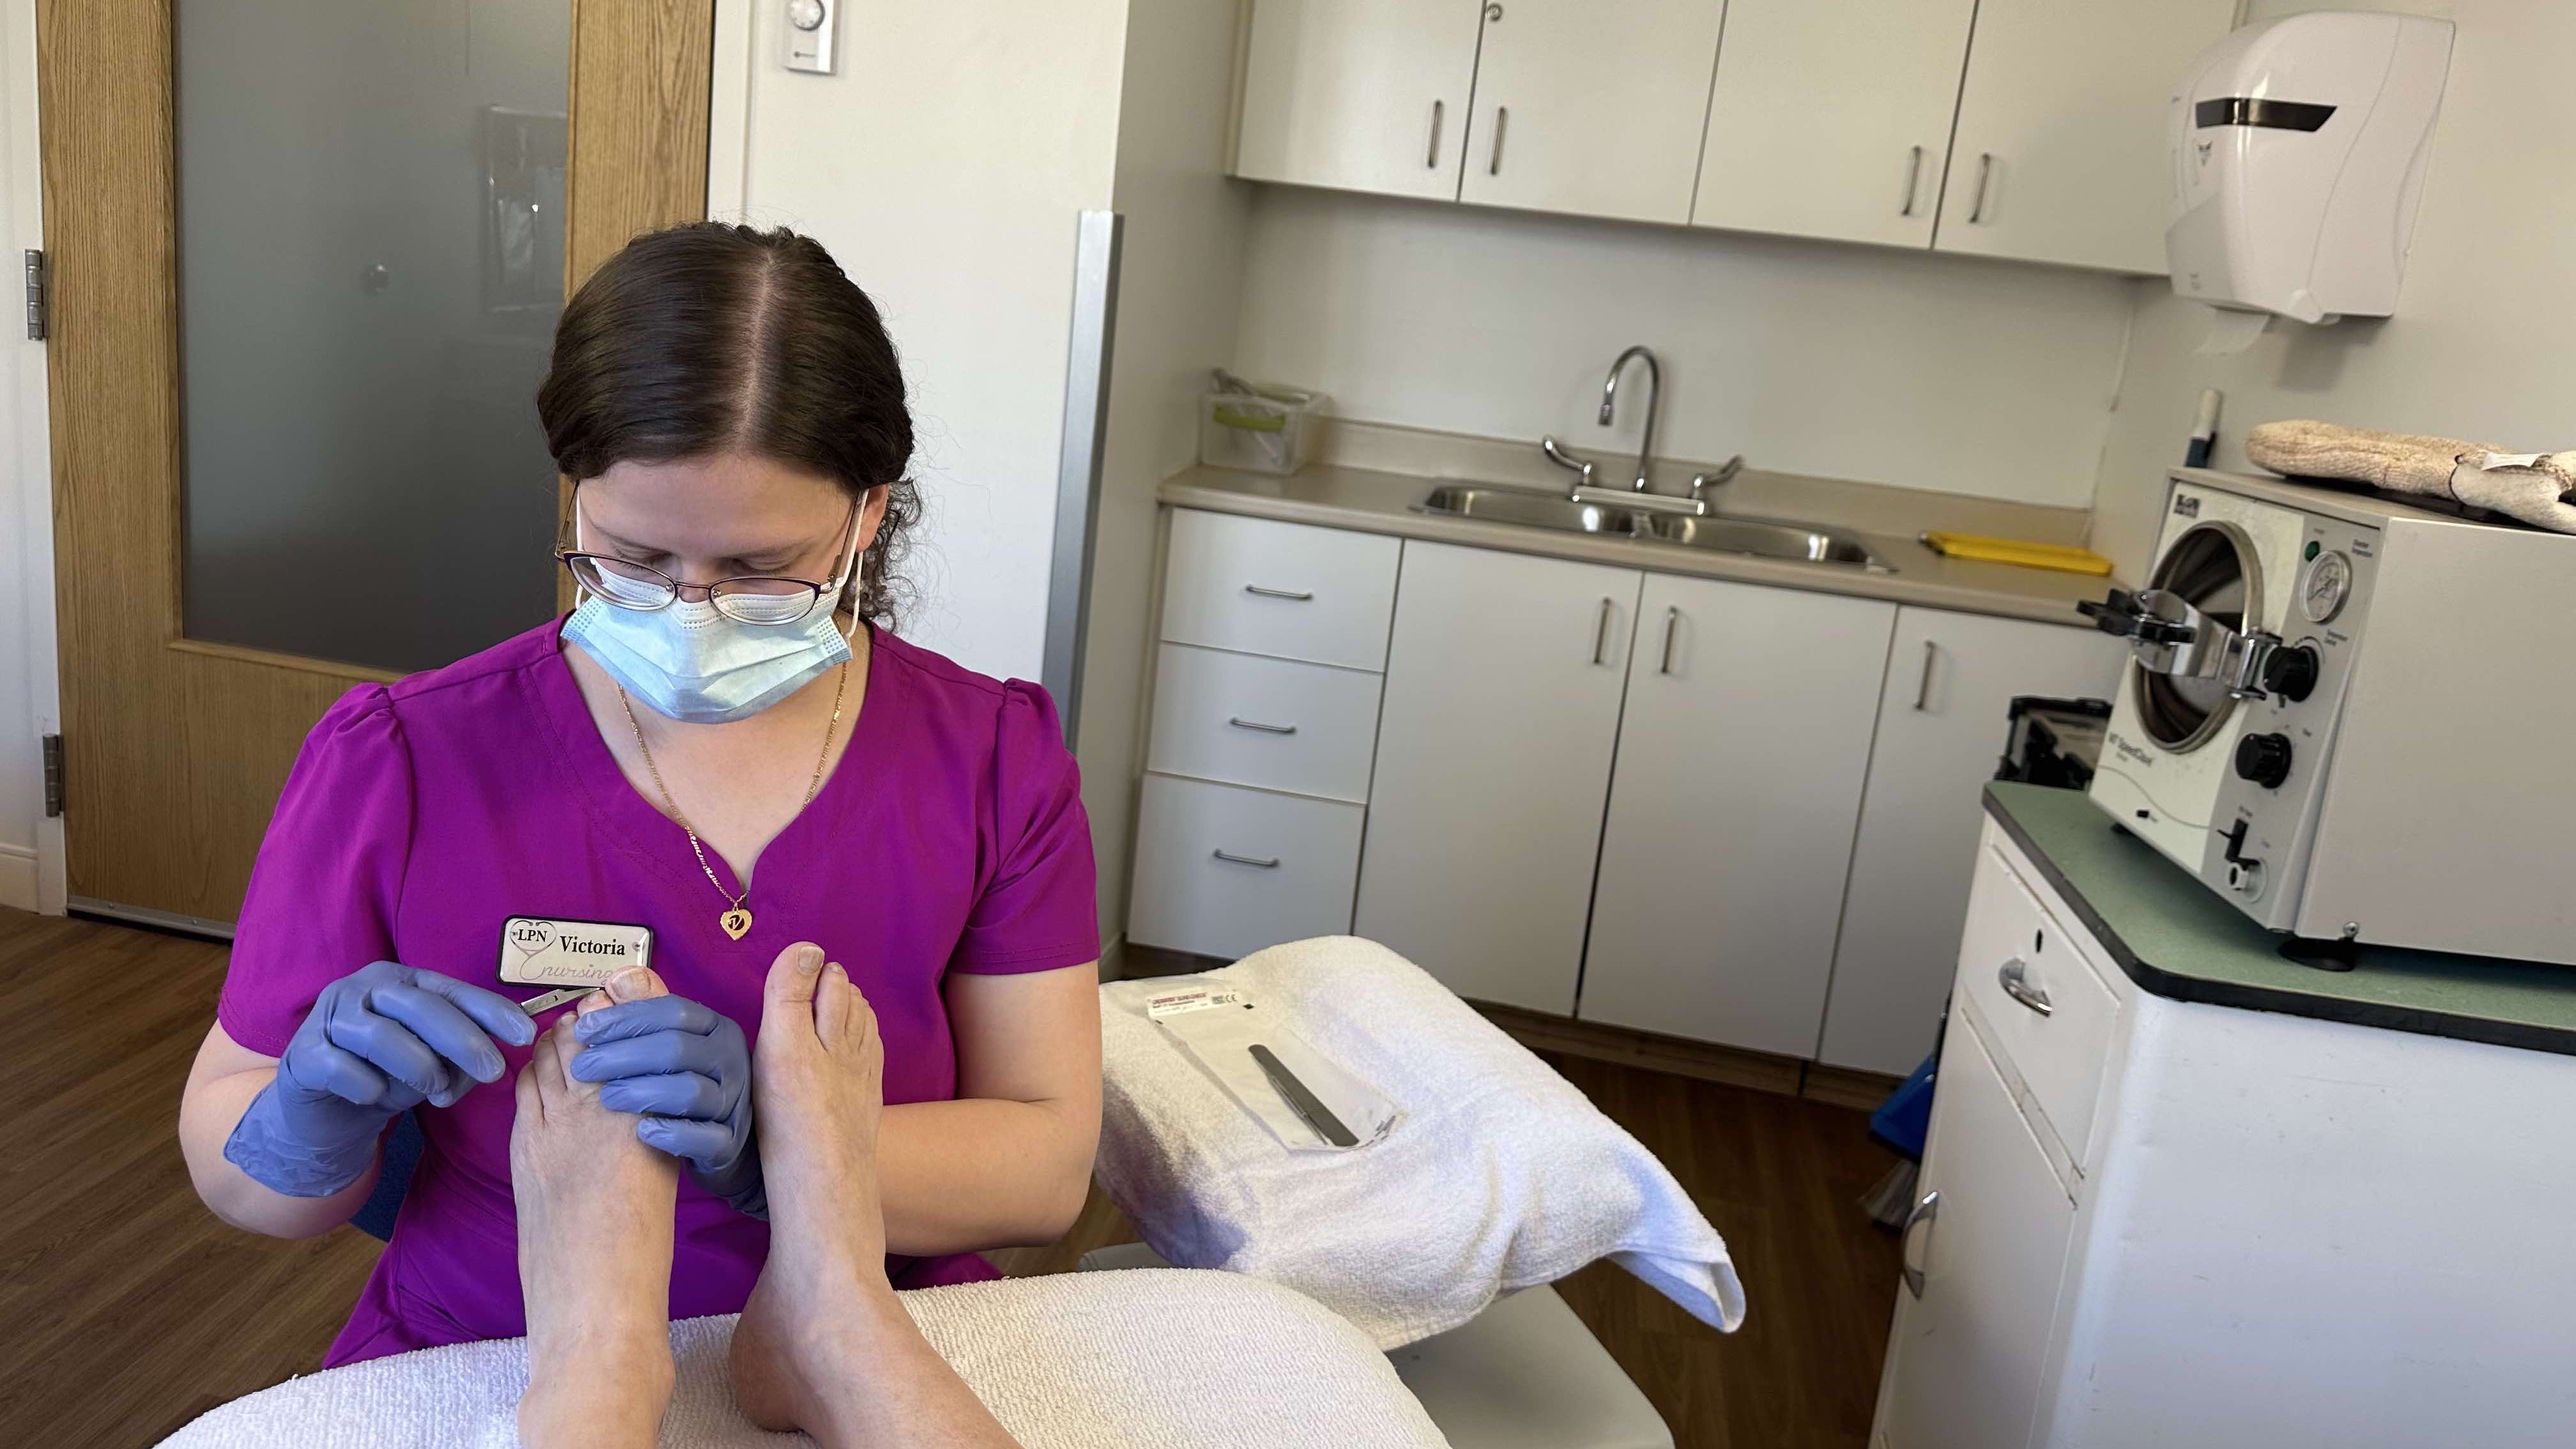 Victoria performing foot care.